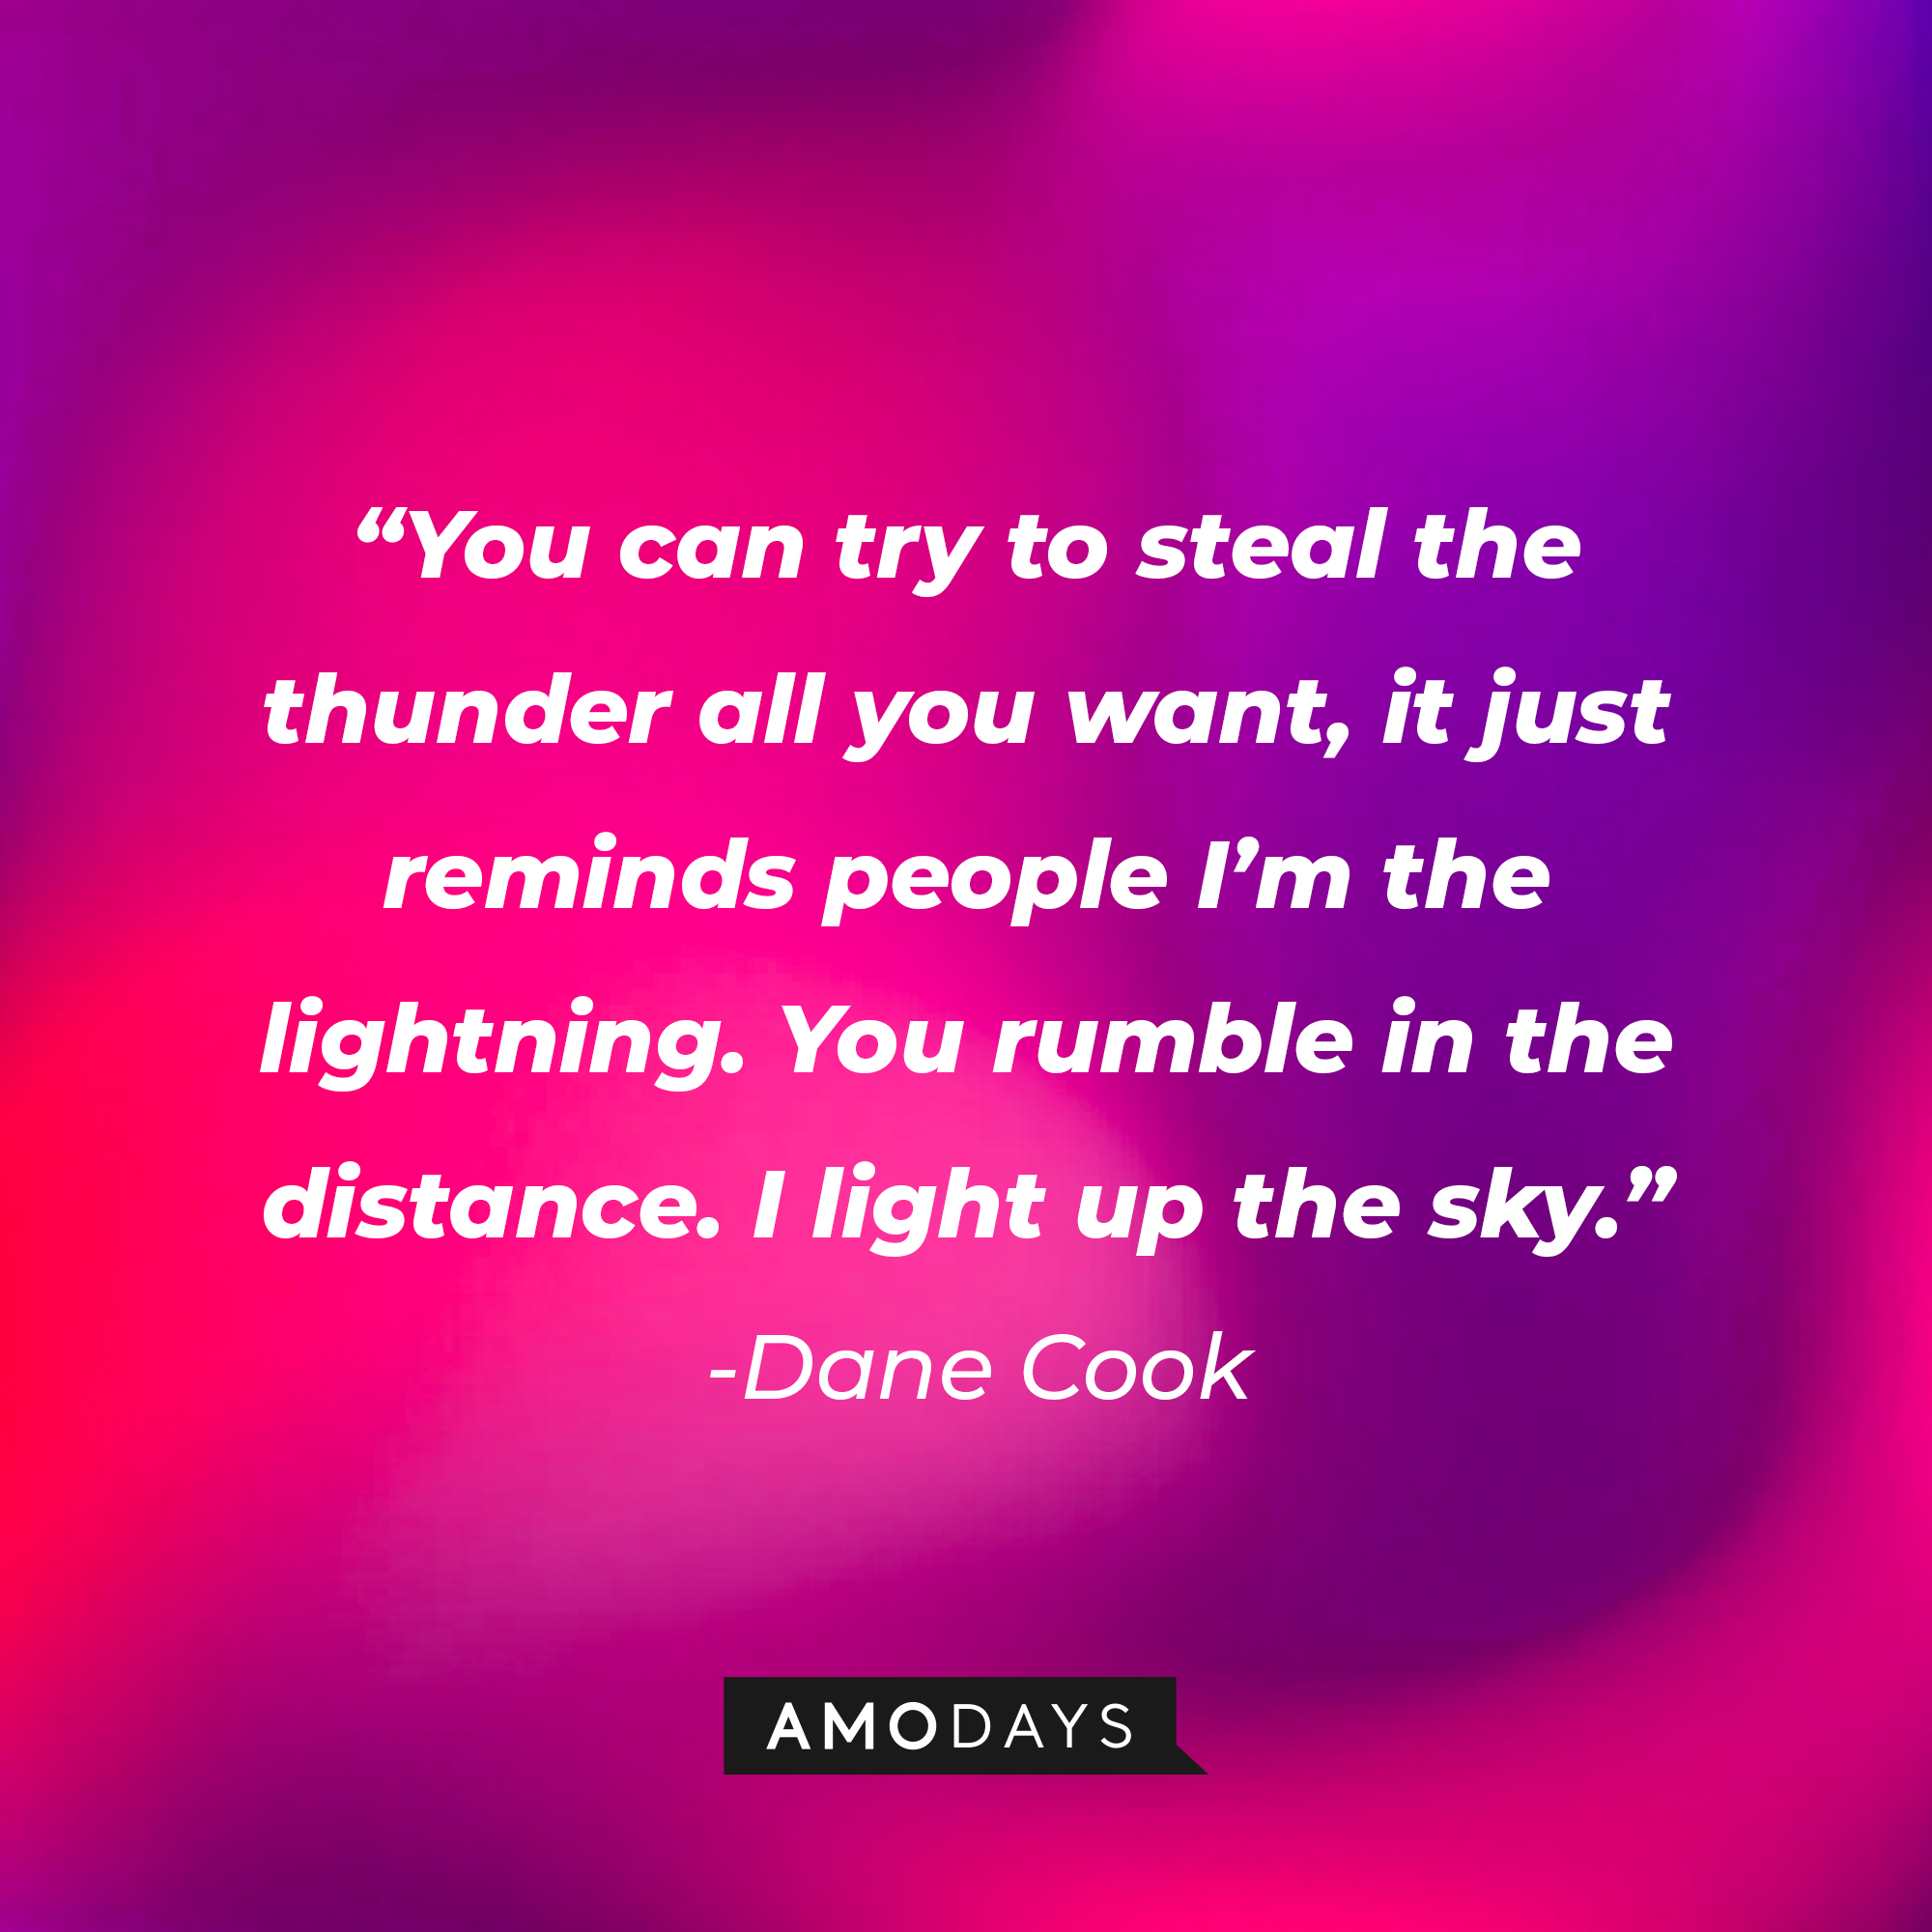 Dane Cook's quote: “You can try to steal the thunder all you want, it just reminds people I’m the lightning. You rumble in the distance. I light up the sky.”  | Source: Amodays